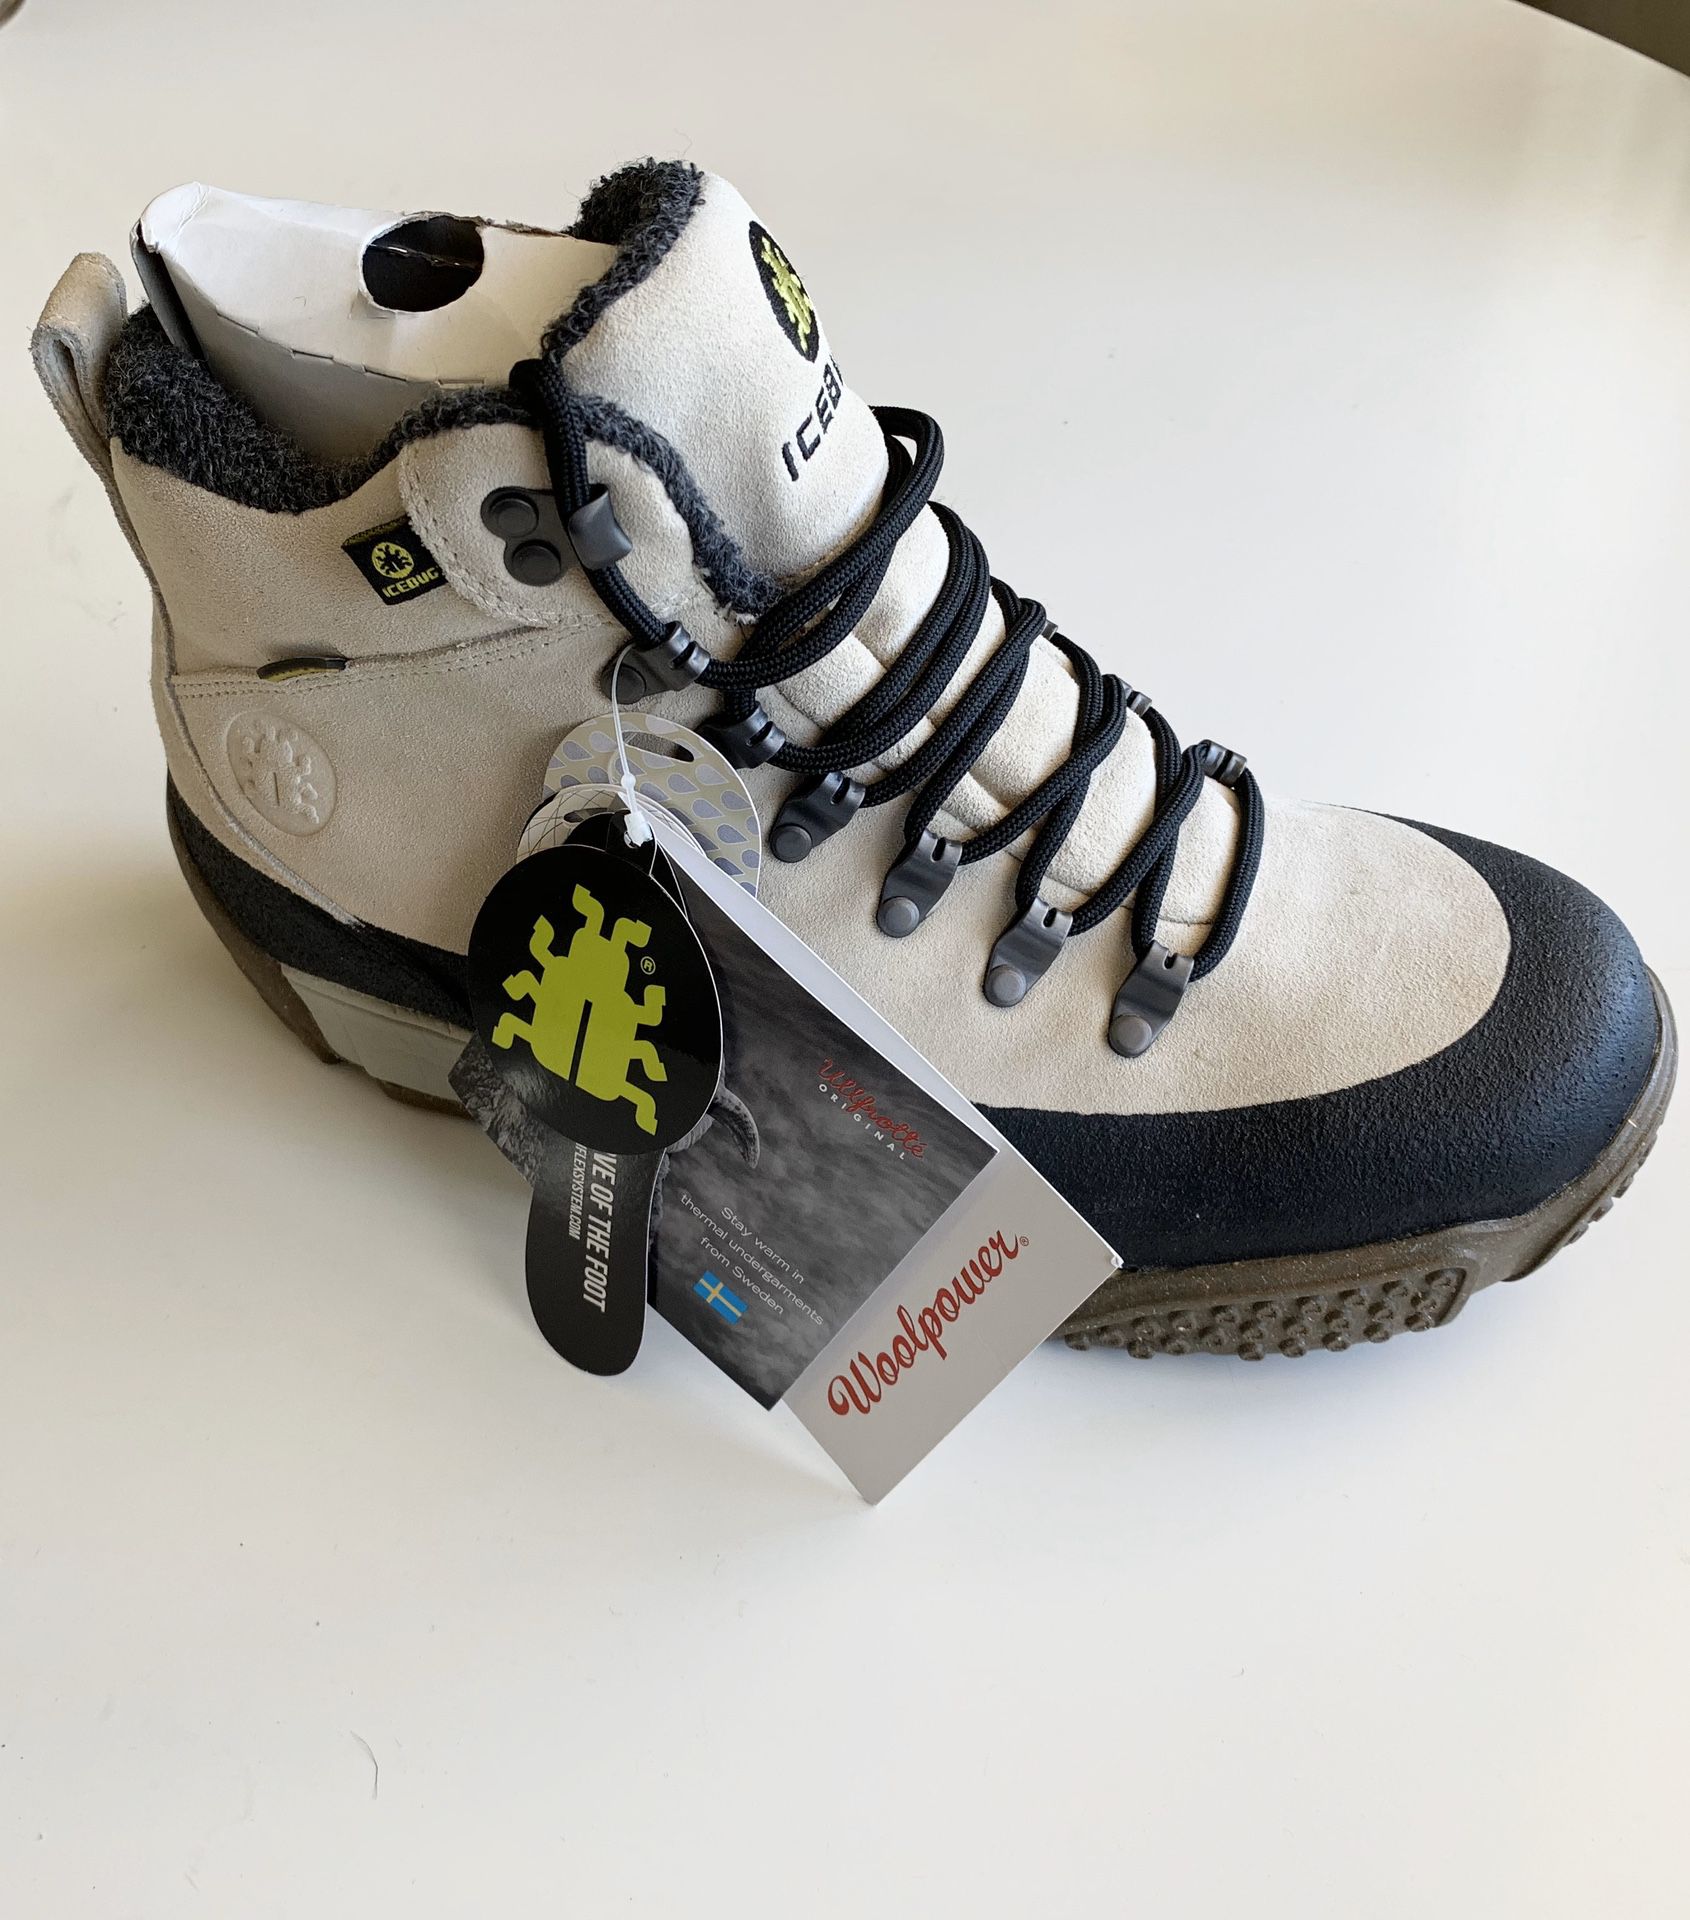 Icebug Lodur Men’s snow boots shoes size 9 brand new w/ tags